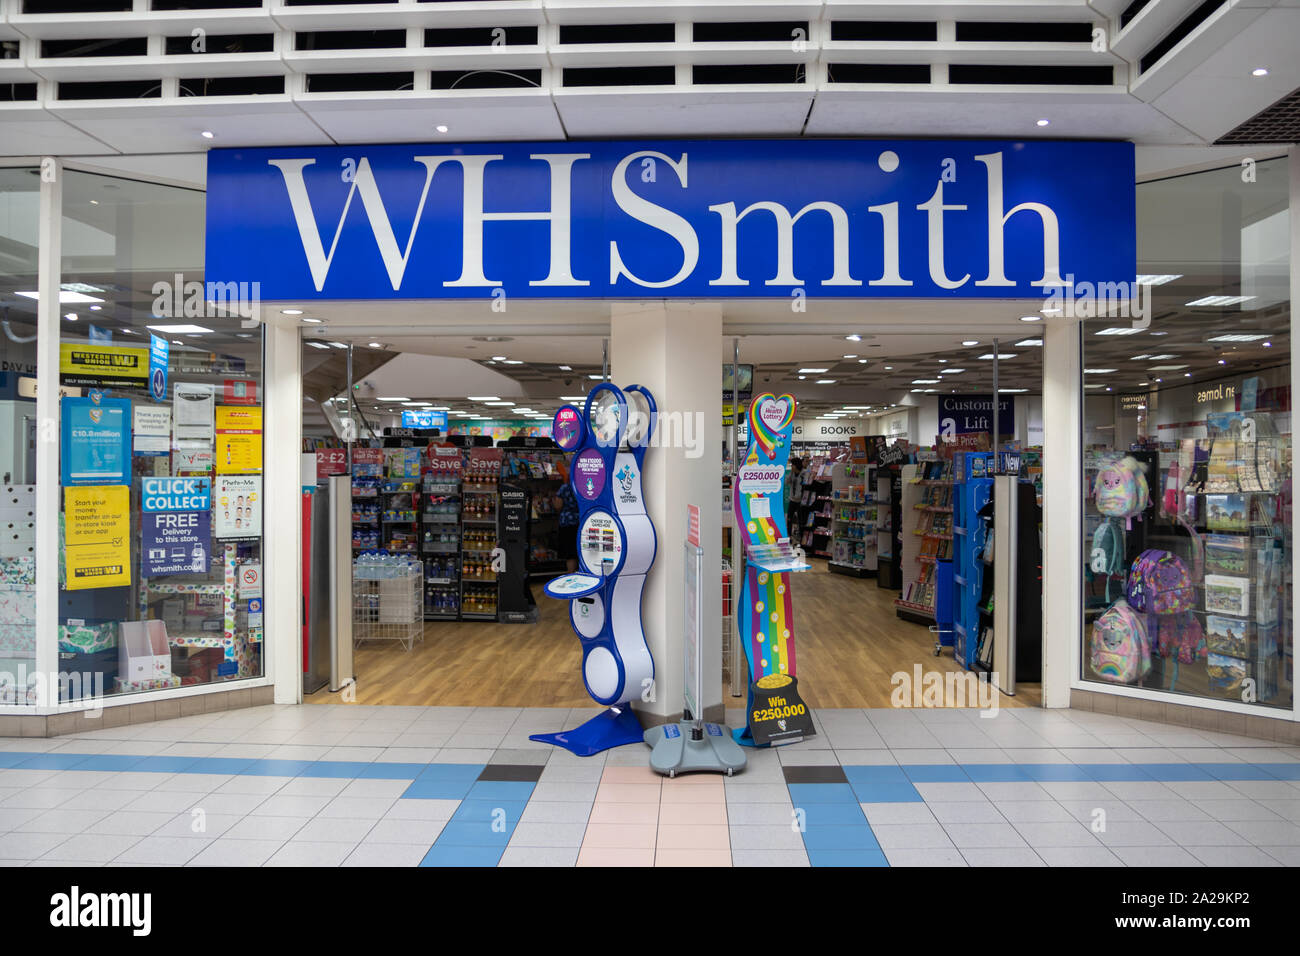 Whsmith Shop High Resolution Stock Photography and Images - Alamy